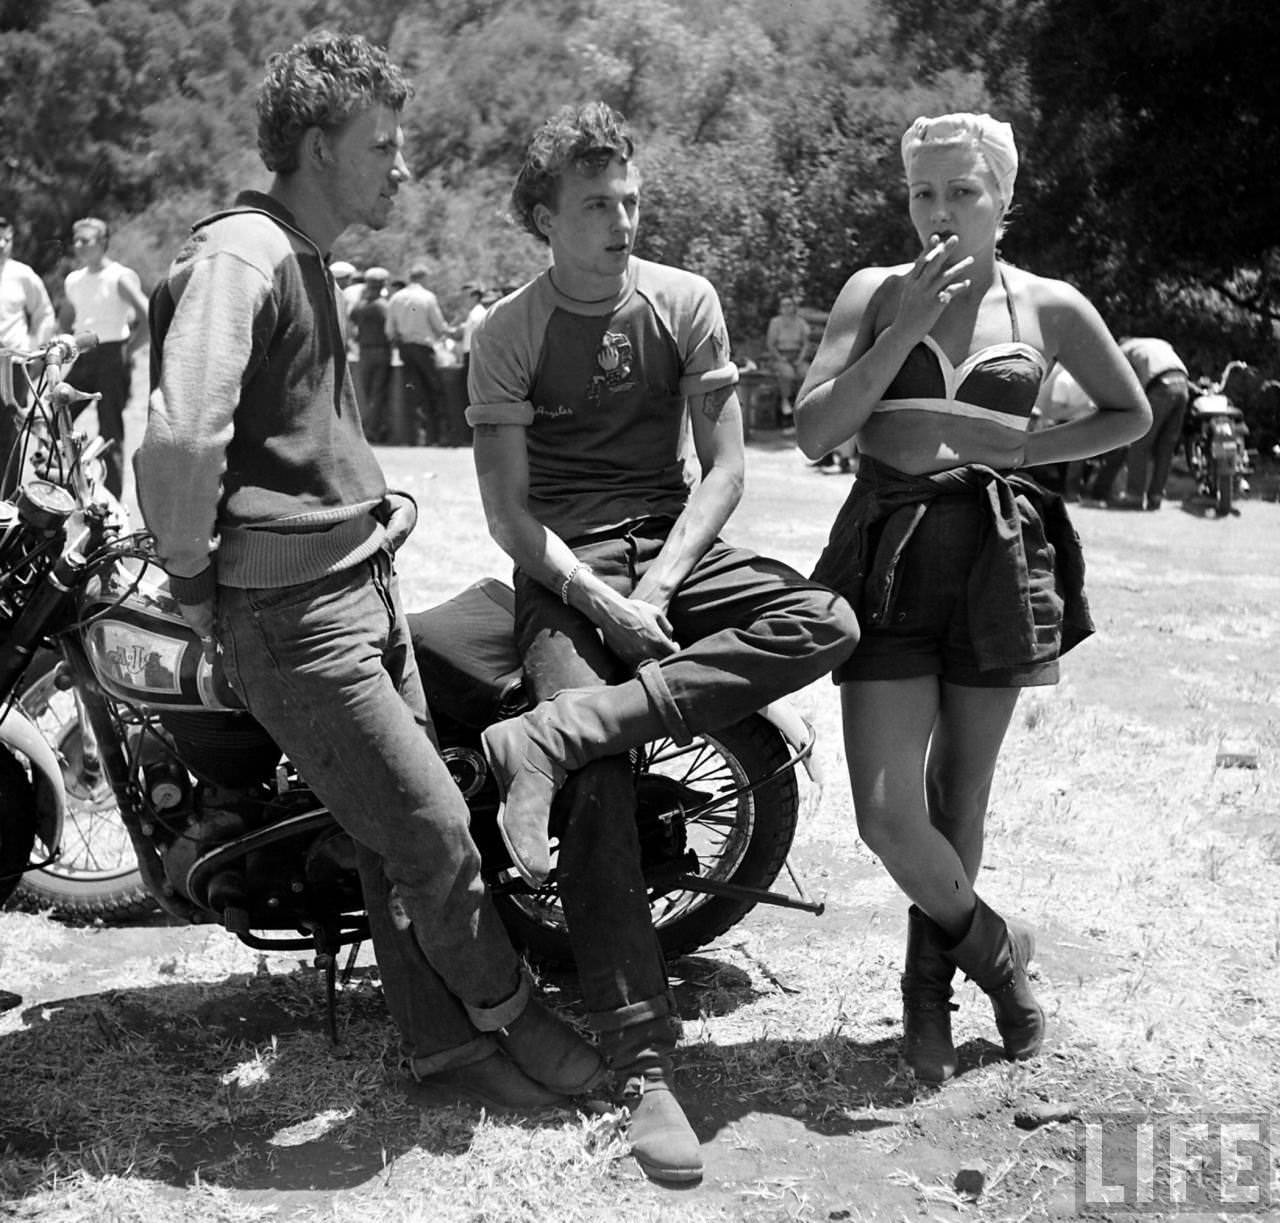 Pioneers of the Road: LIFE Magazine's Female Motorcyclists of 1949